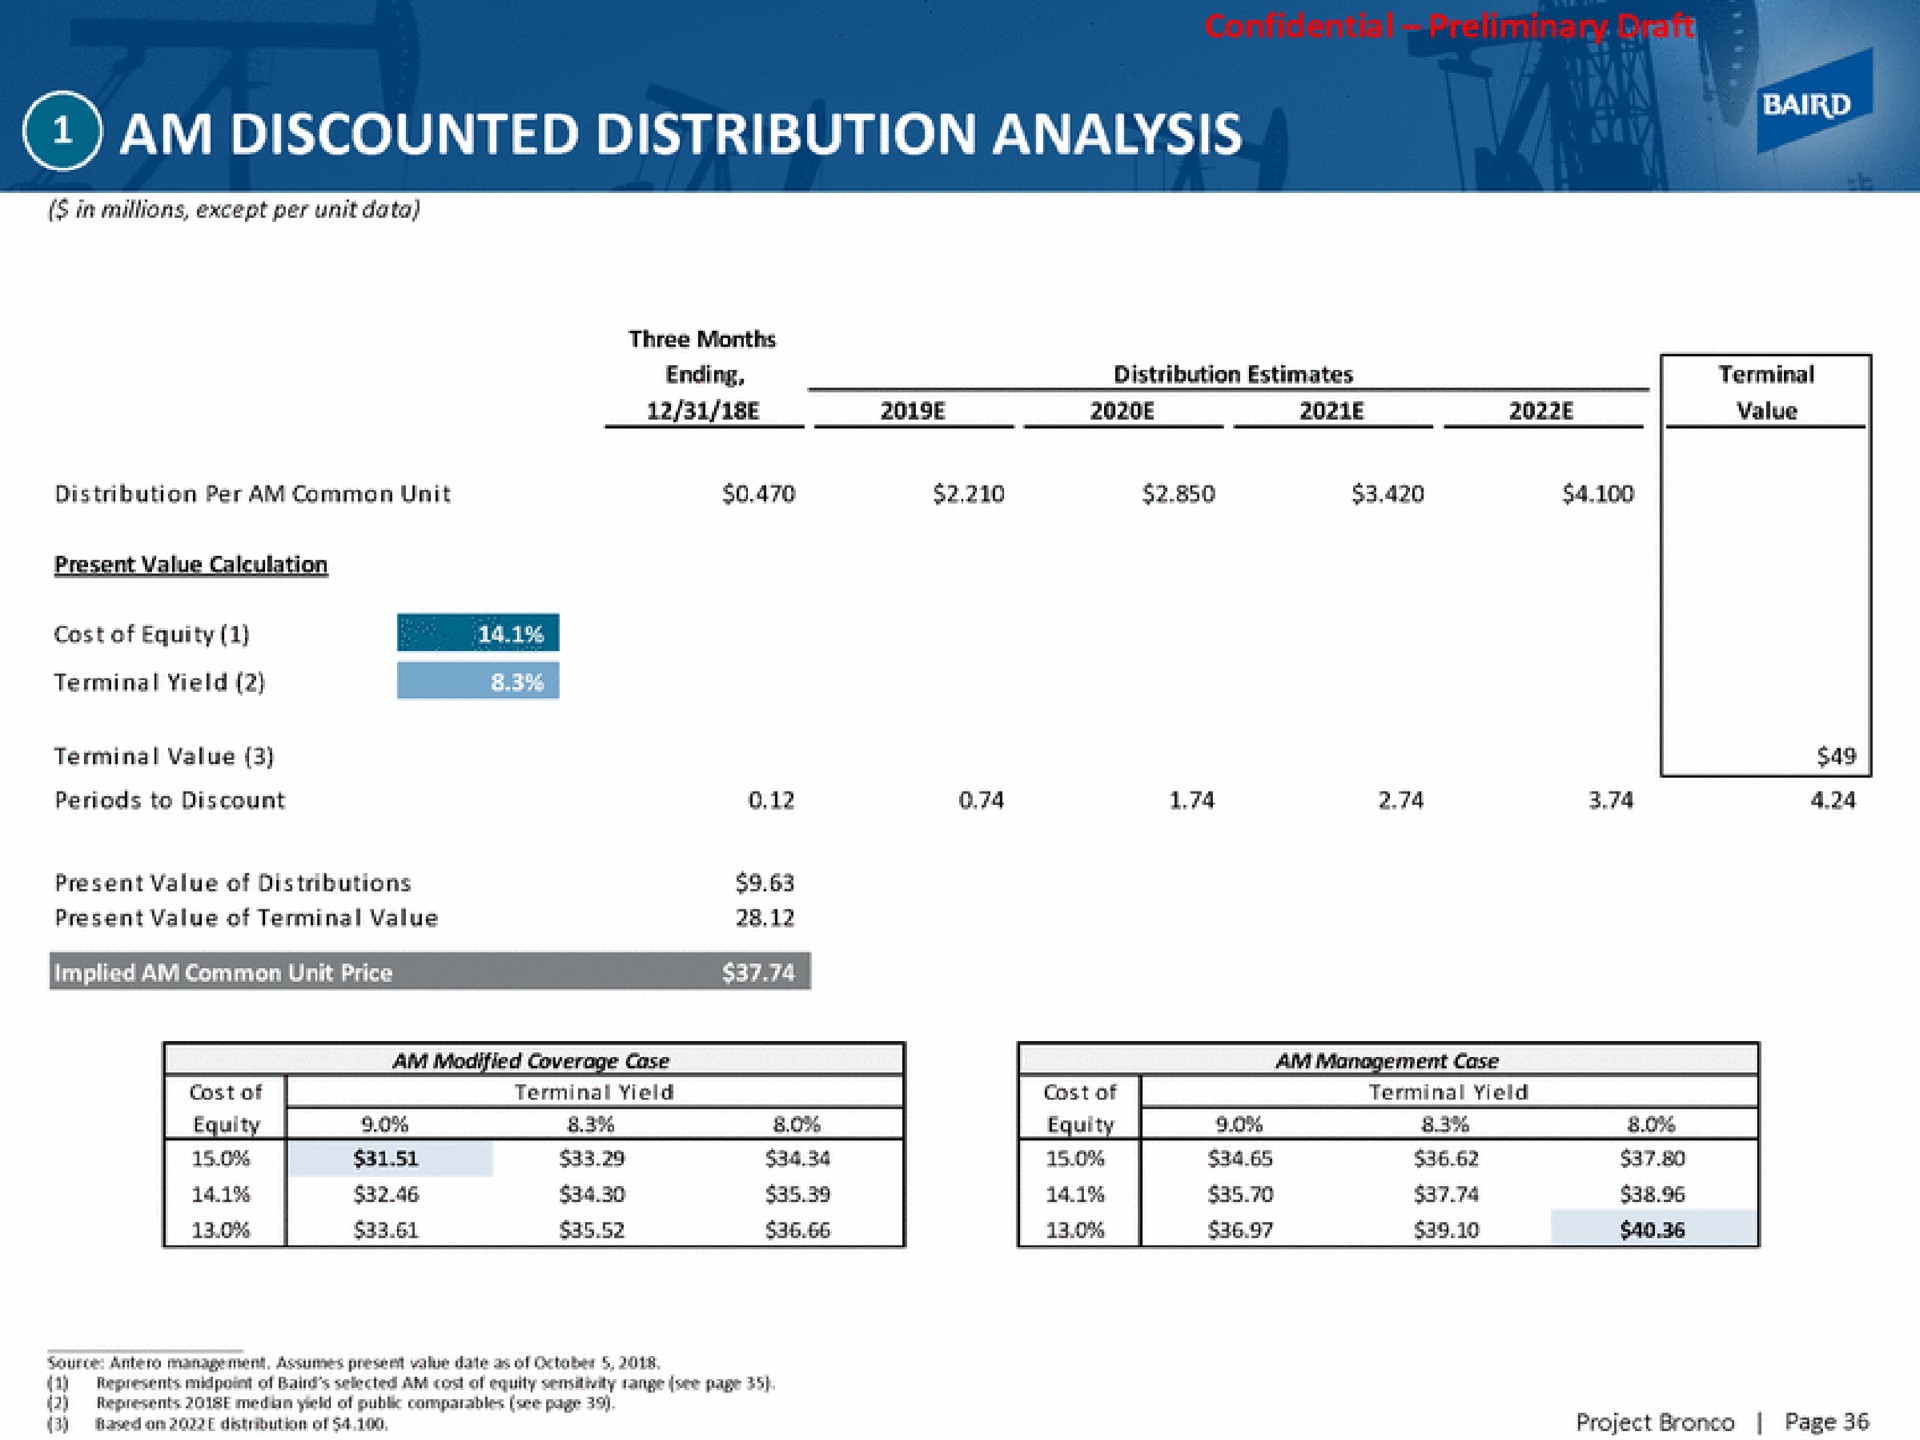 am discounted distribution analysis cost of equity | Baird